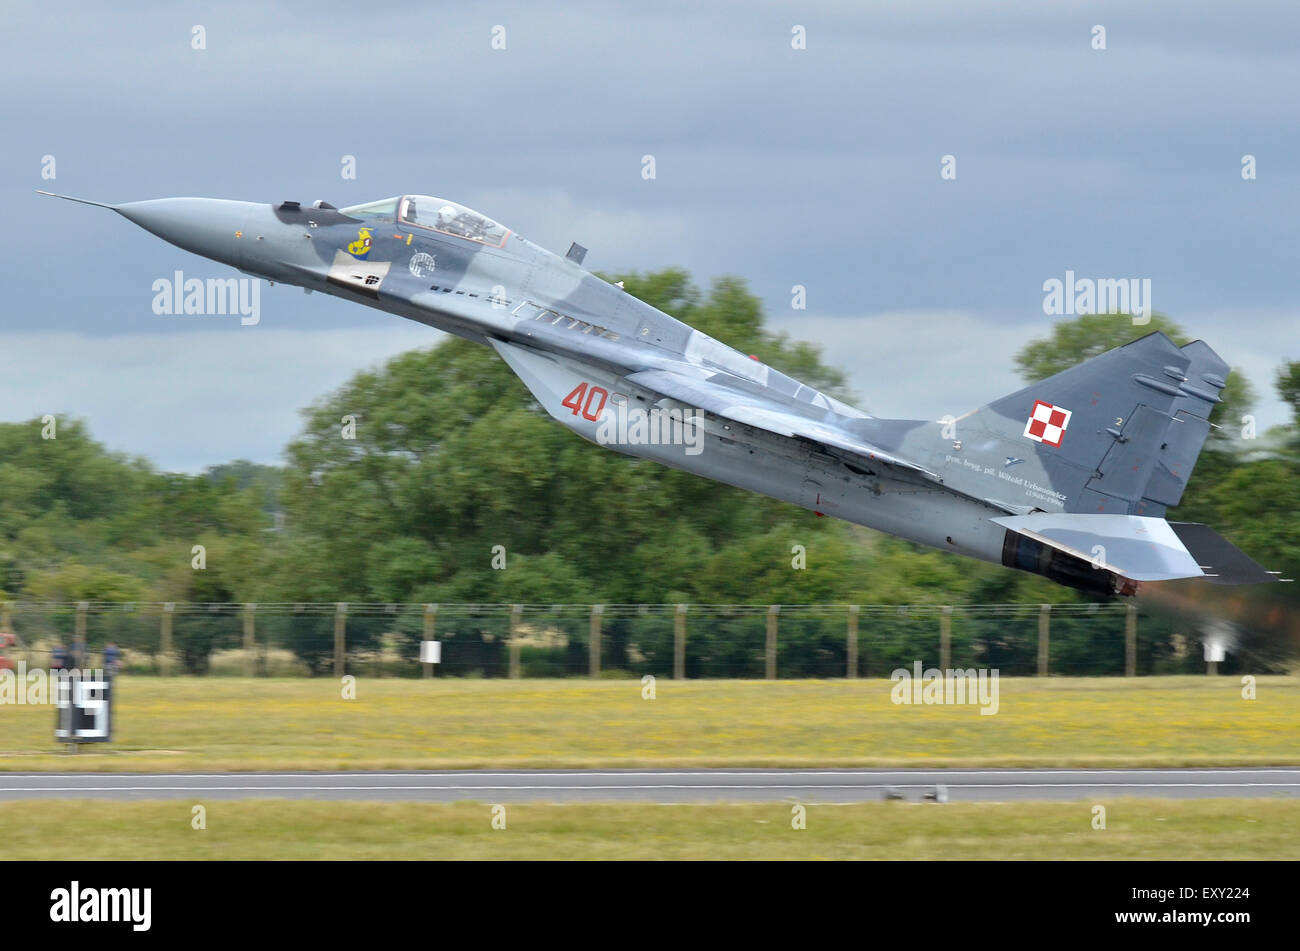 Mikoyan Gurevich Mig-29 operated by the Polish Air Force taking off in dramatic style at RIAT 2015, Fairford, UK. Credit:  Antony Nettle/Alamy Live News Stock Photo